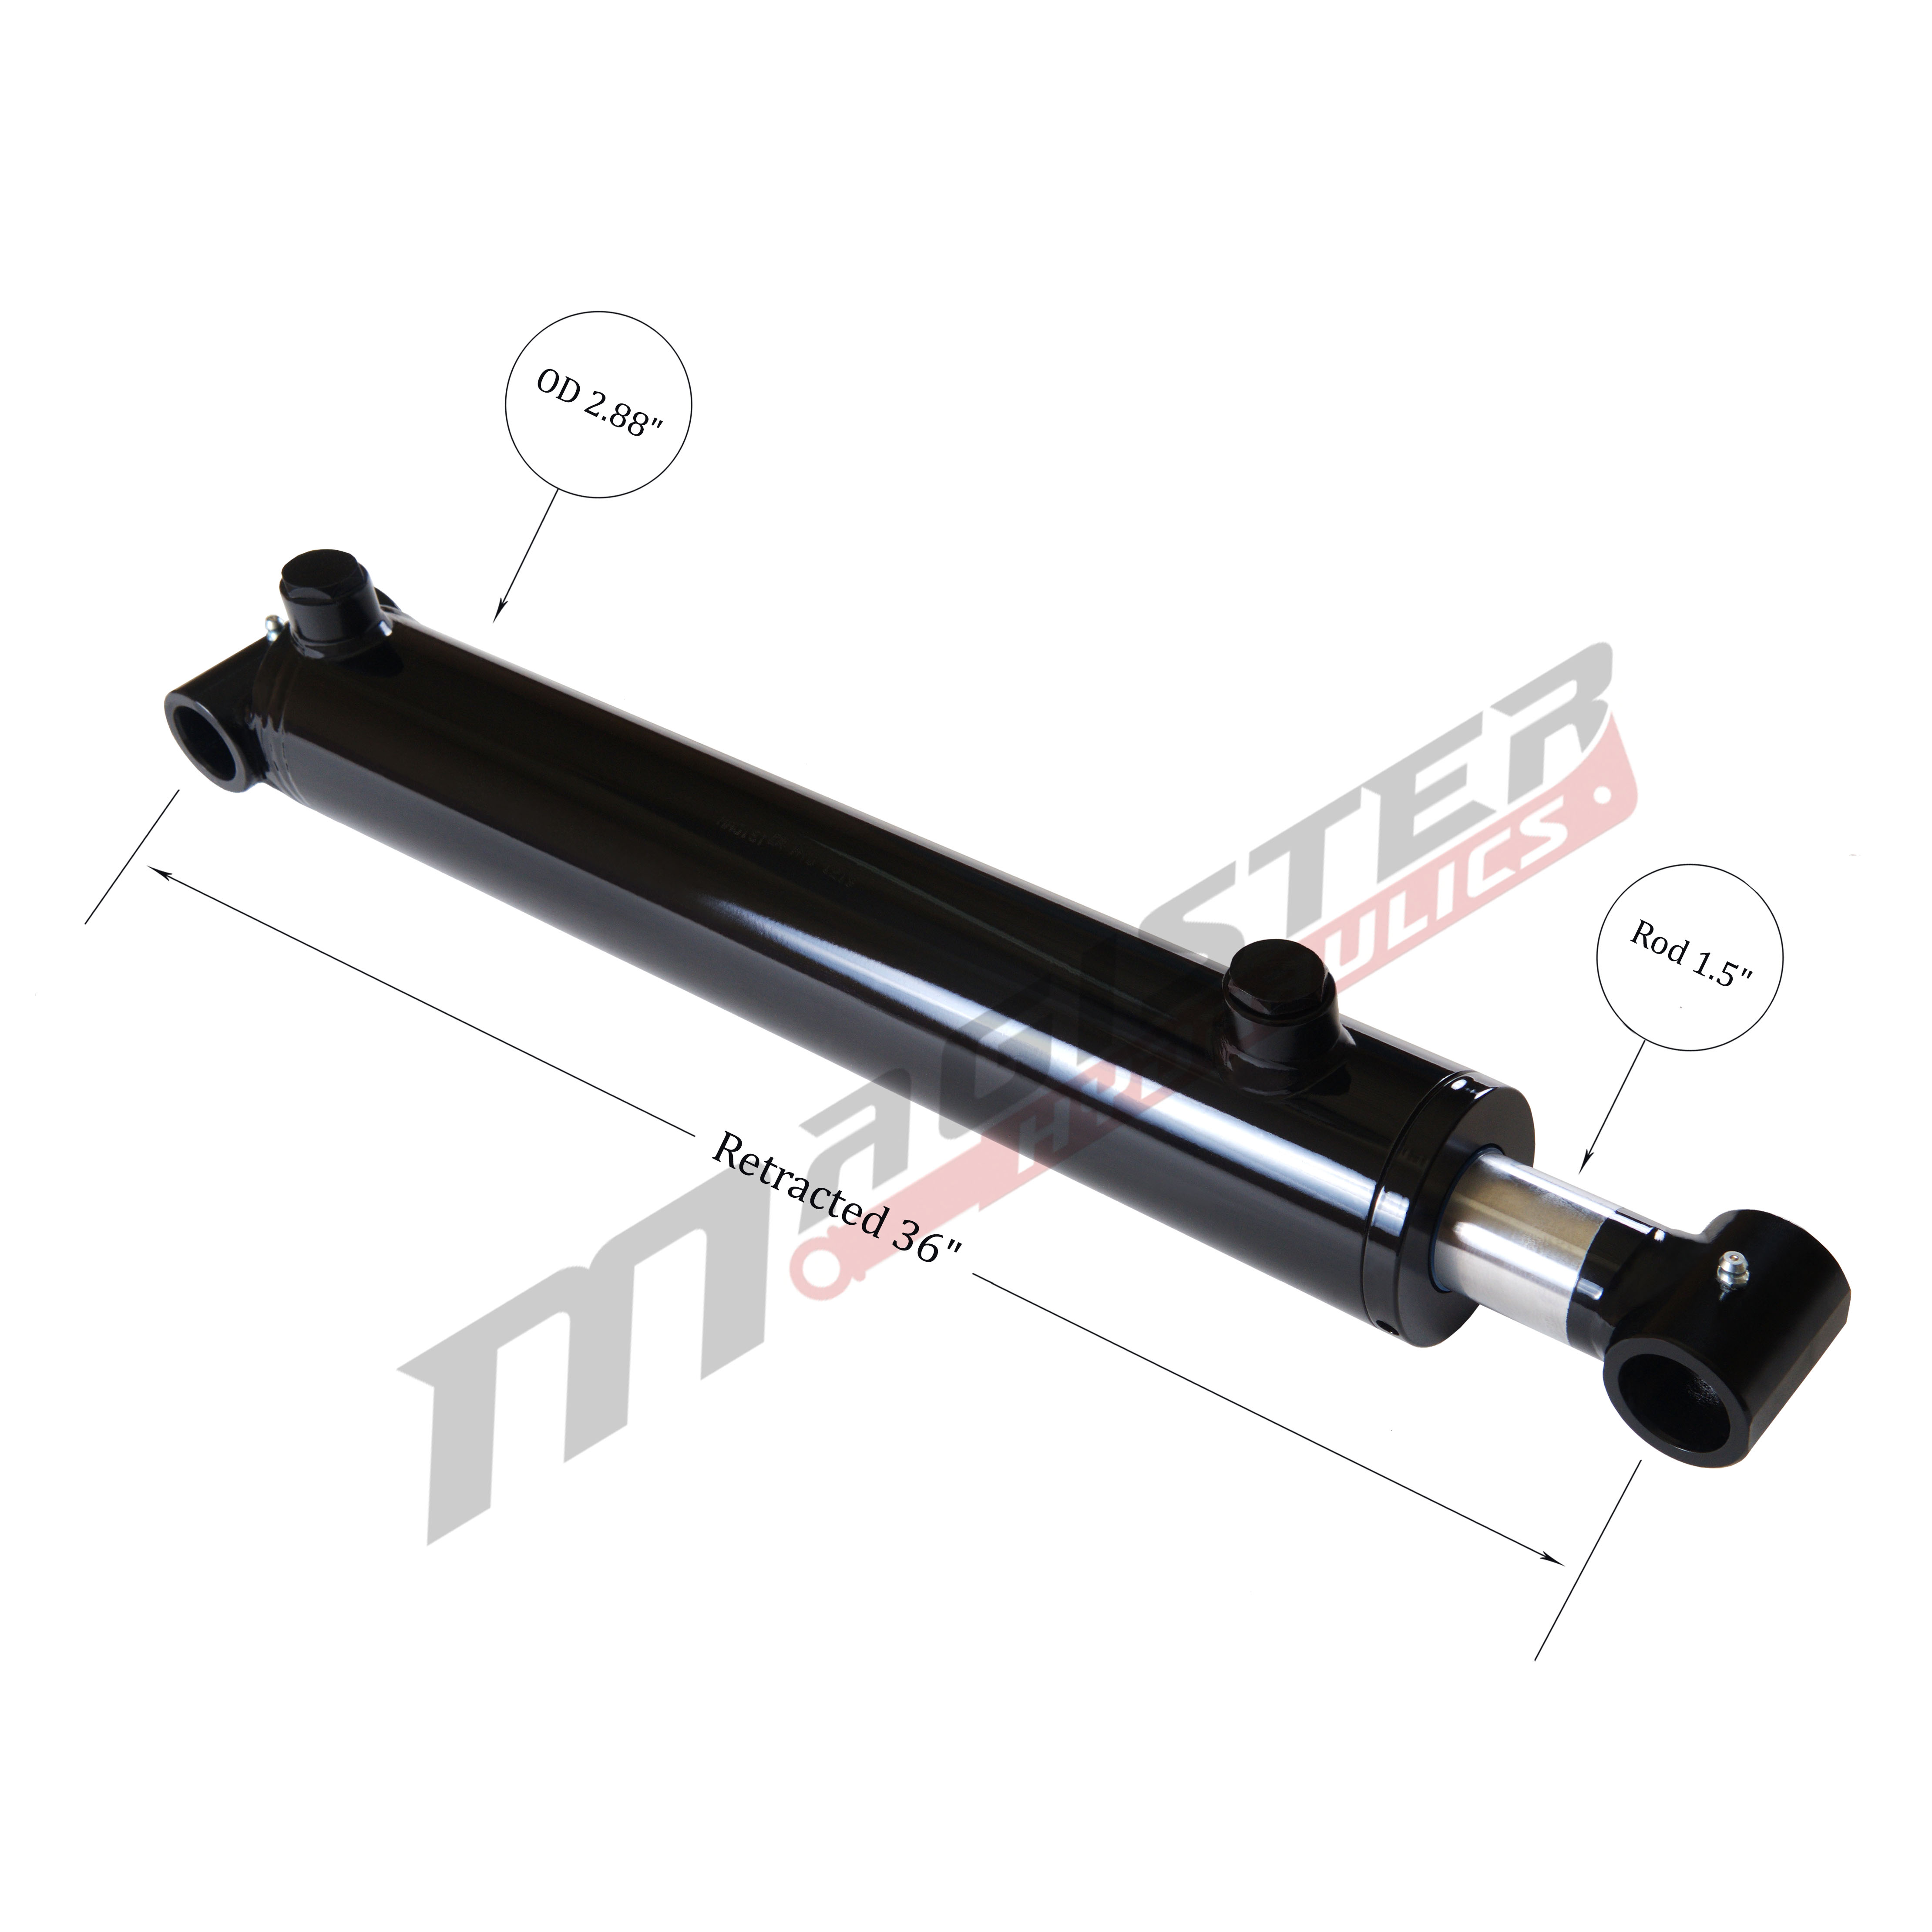 2.5 bore x 28 stroke hydraulic cylinder, welded cross tube double acting cylinder | Magister Hydraulics